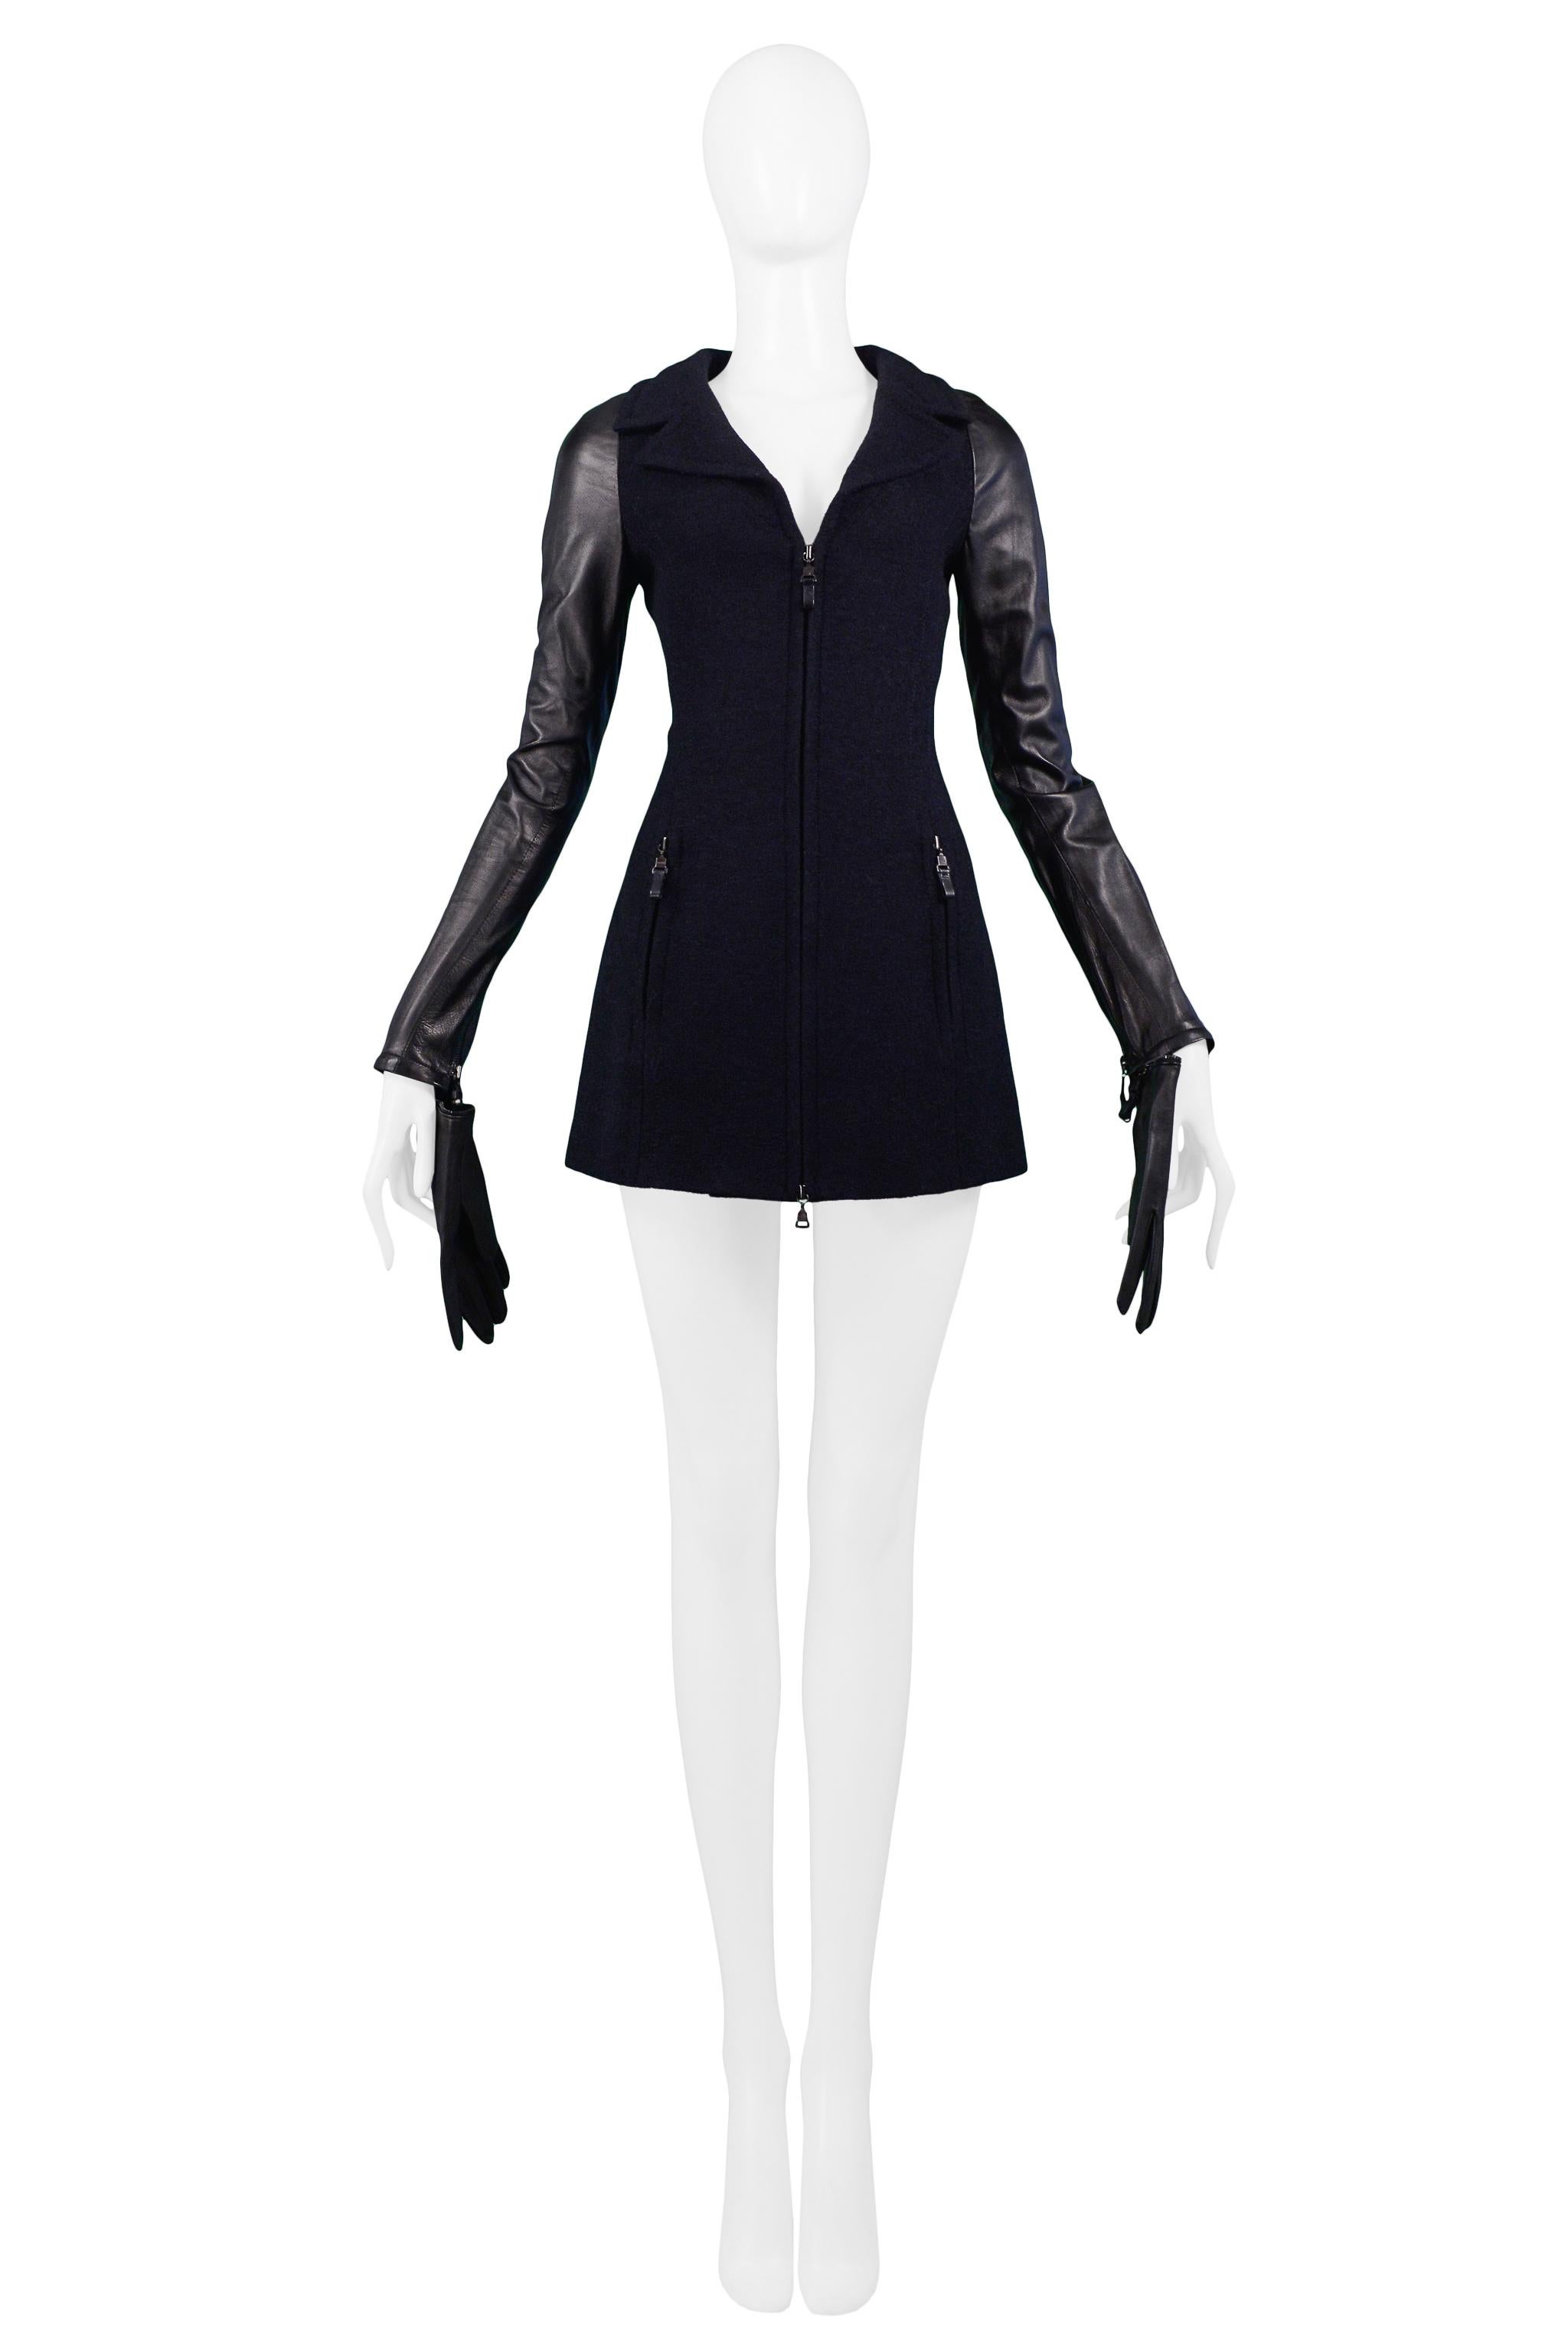 Gianfranco Ferre Black Wool & Leather Glove Runway Jacket 1999  In Excellent Condition In Los Angeles, CA